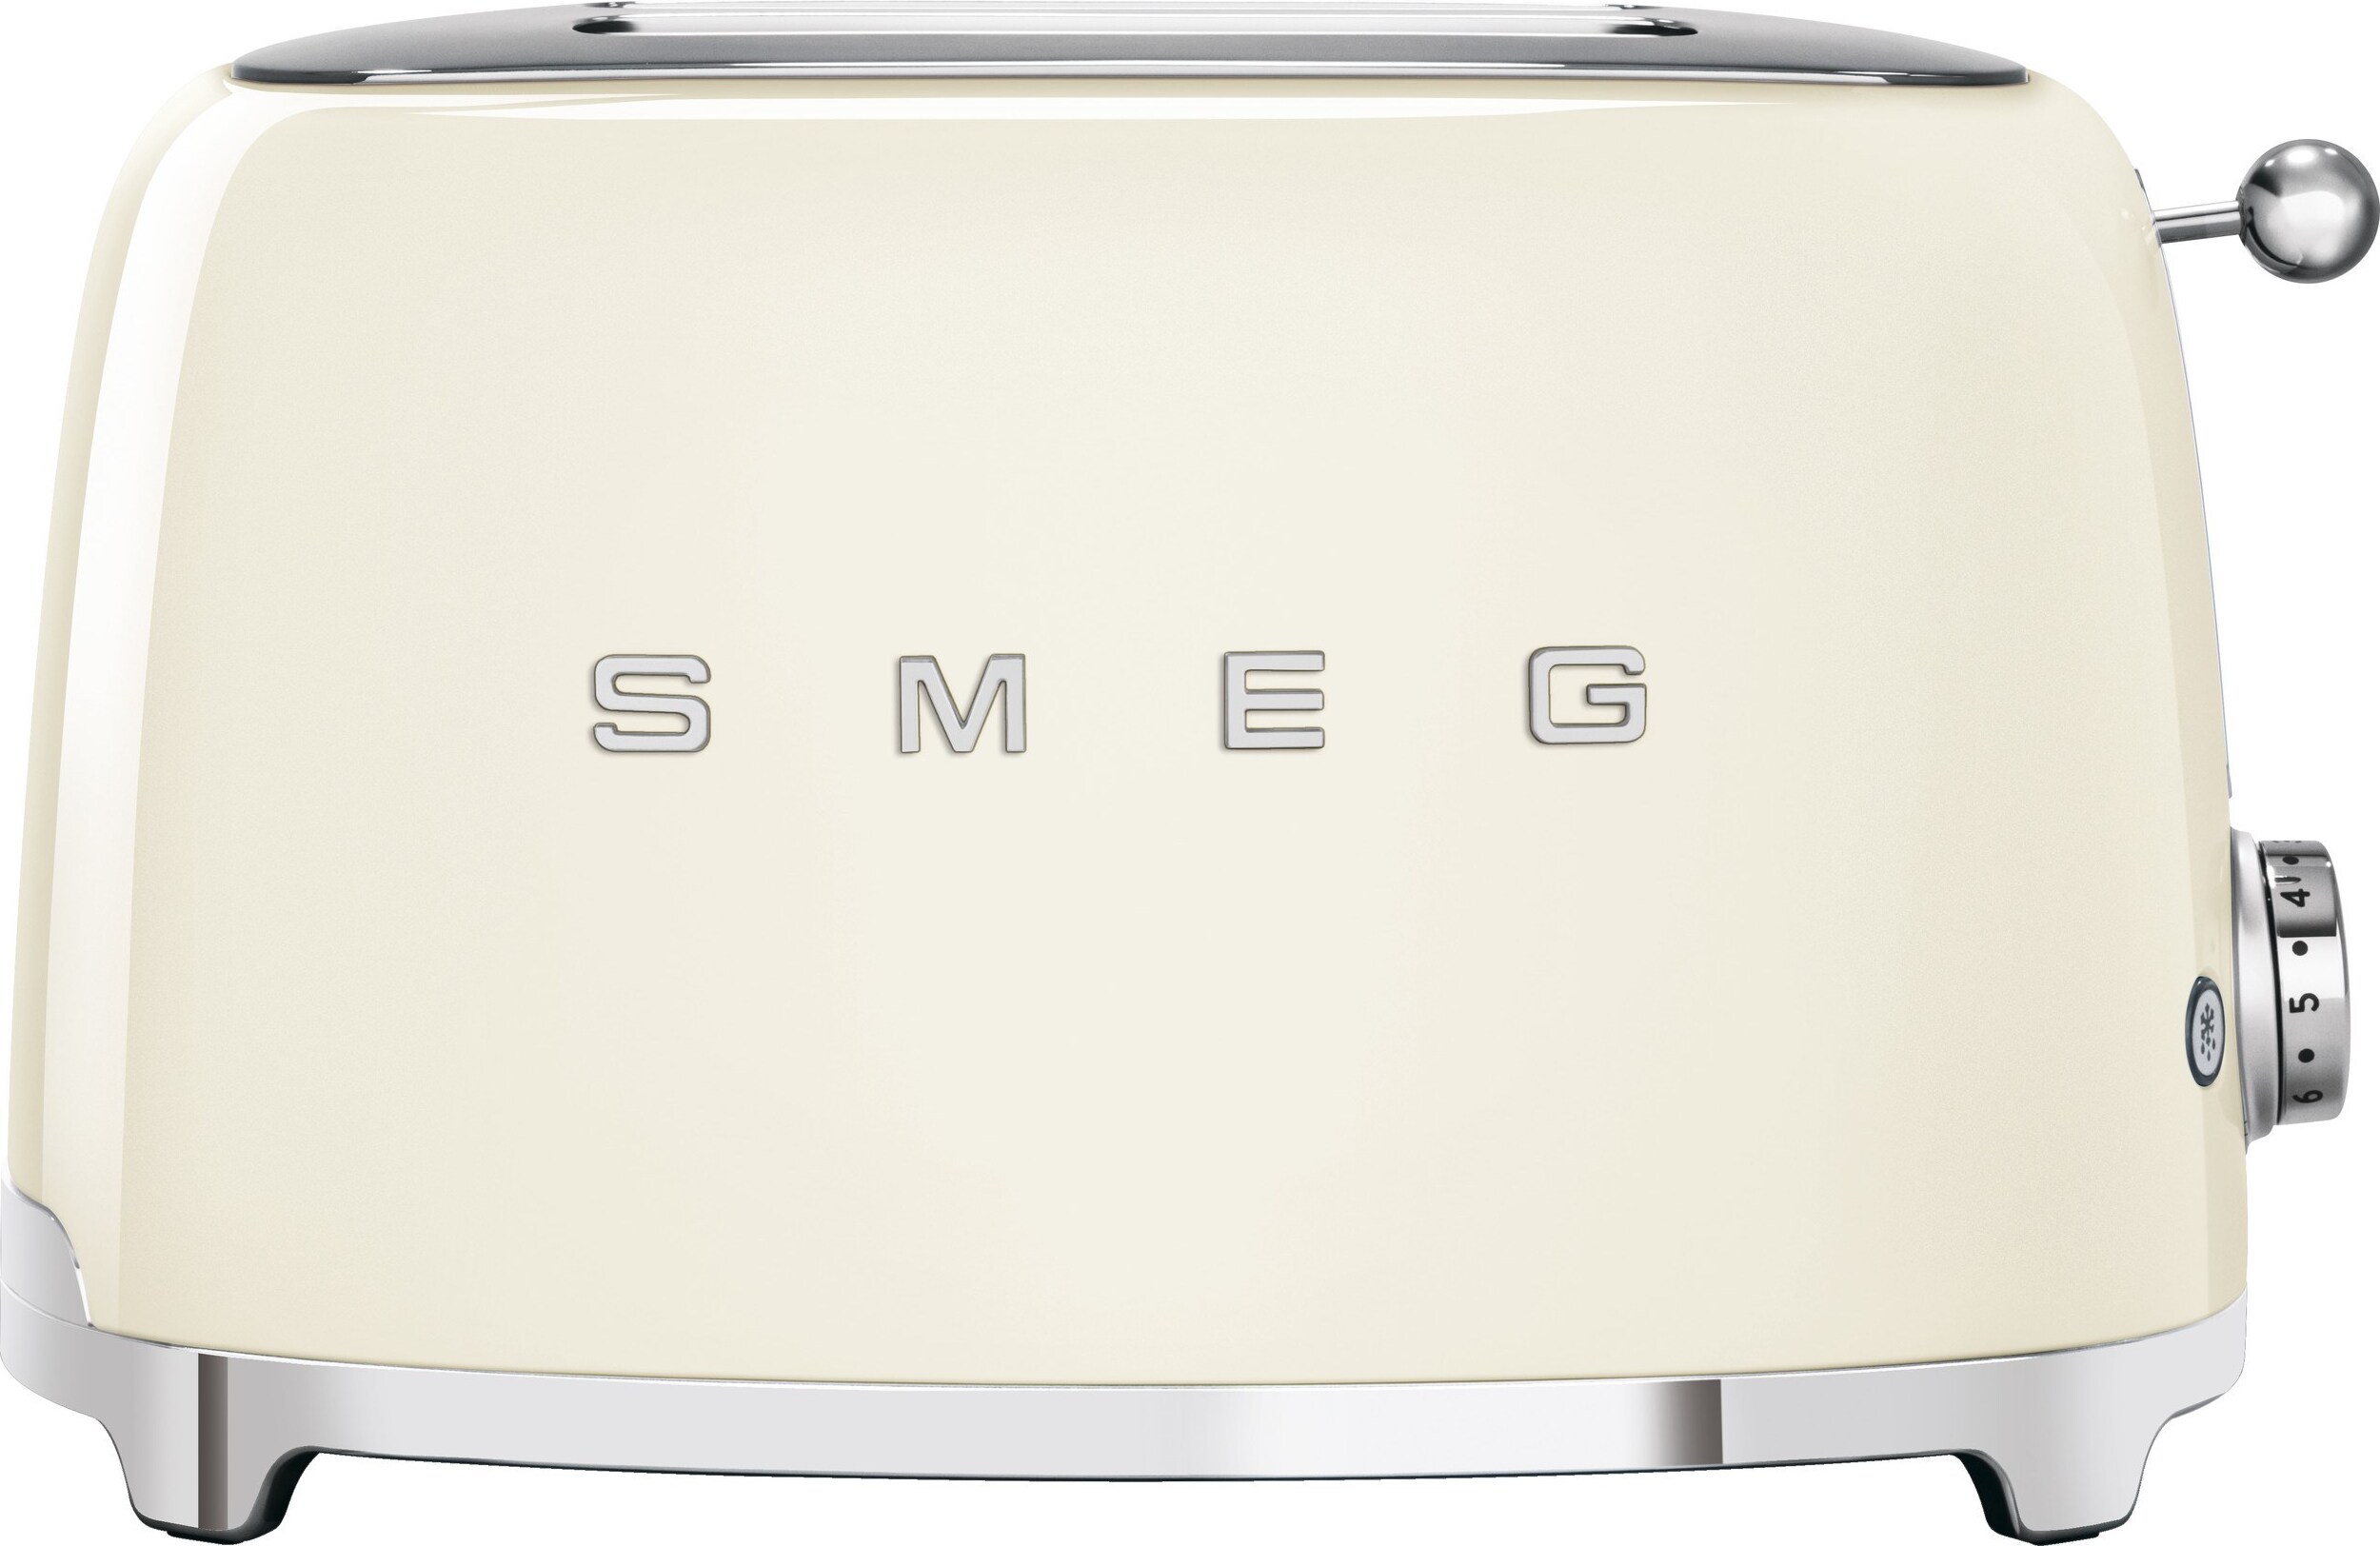 Smeg TSF01 2-Slice Toaster & Toaster Oven Review - Consumer Reports